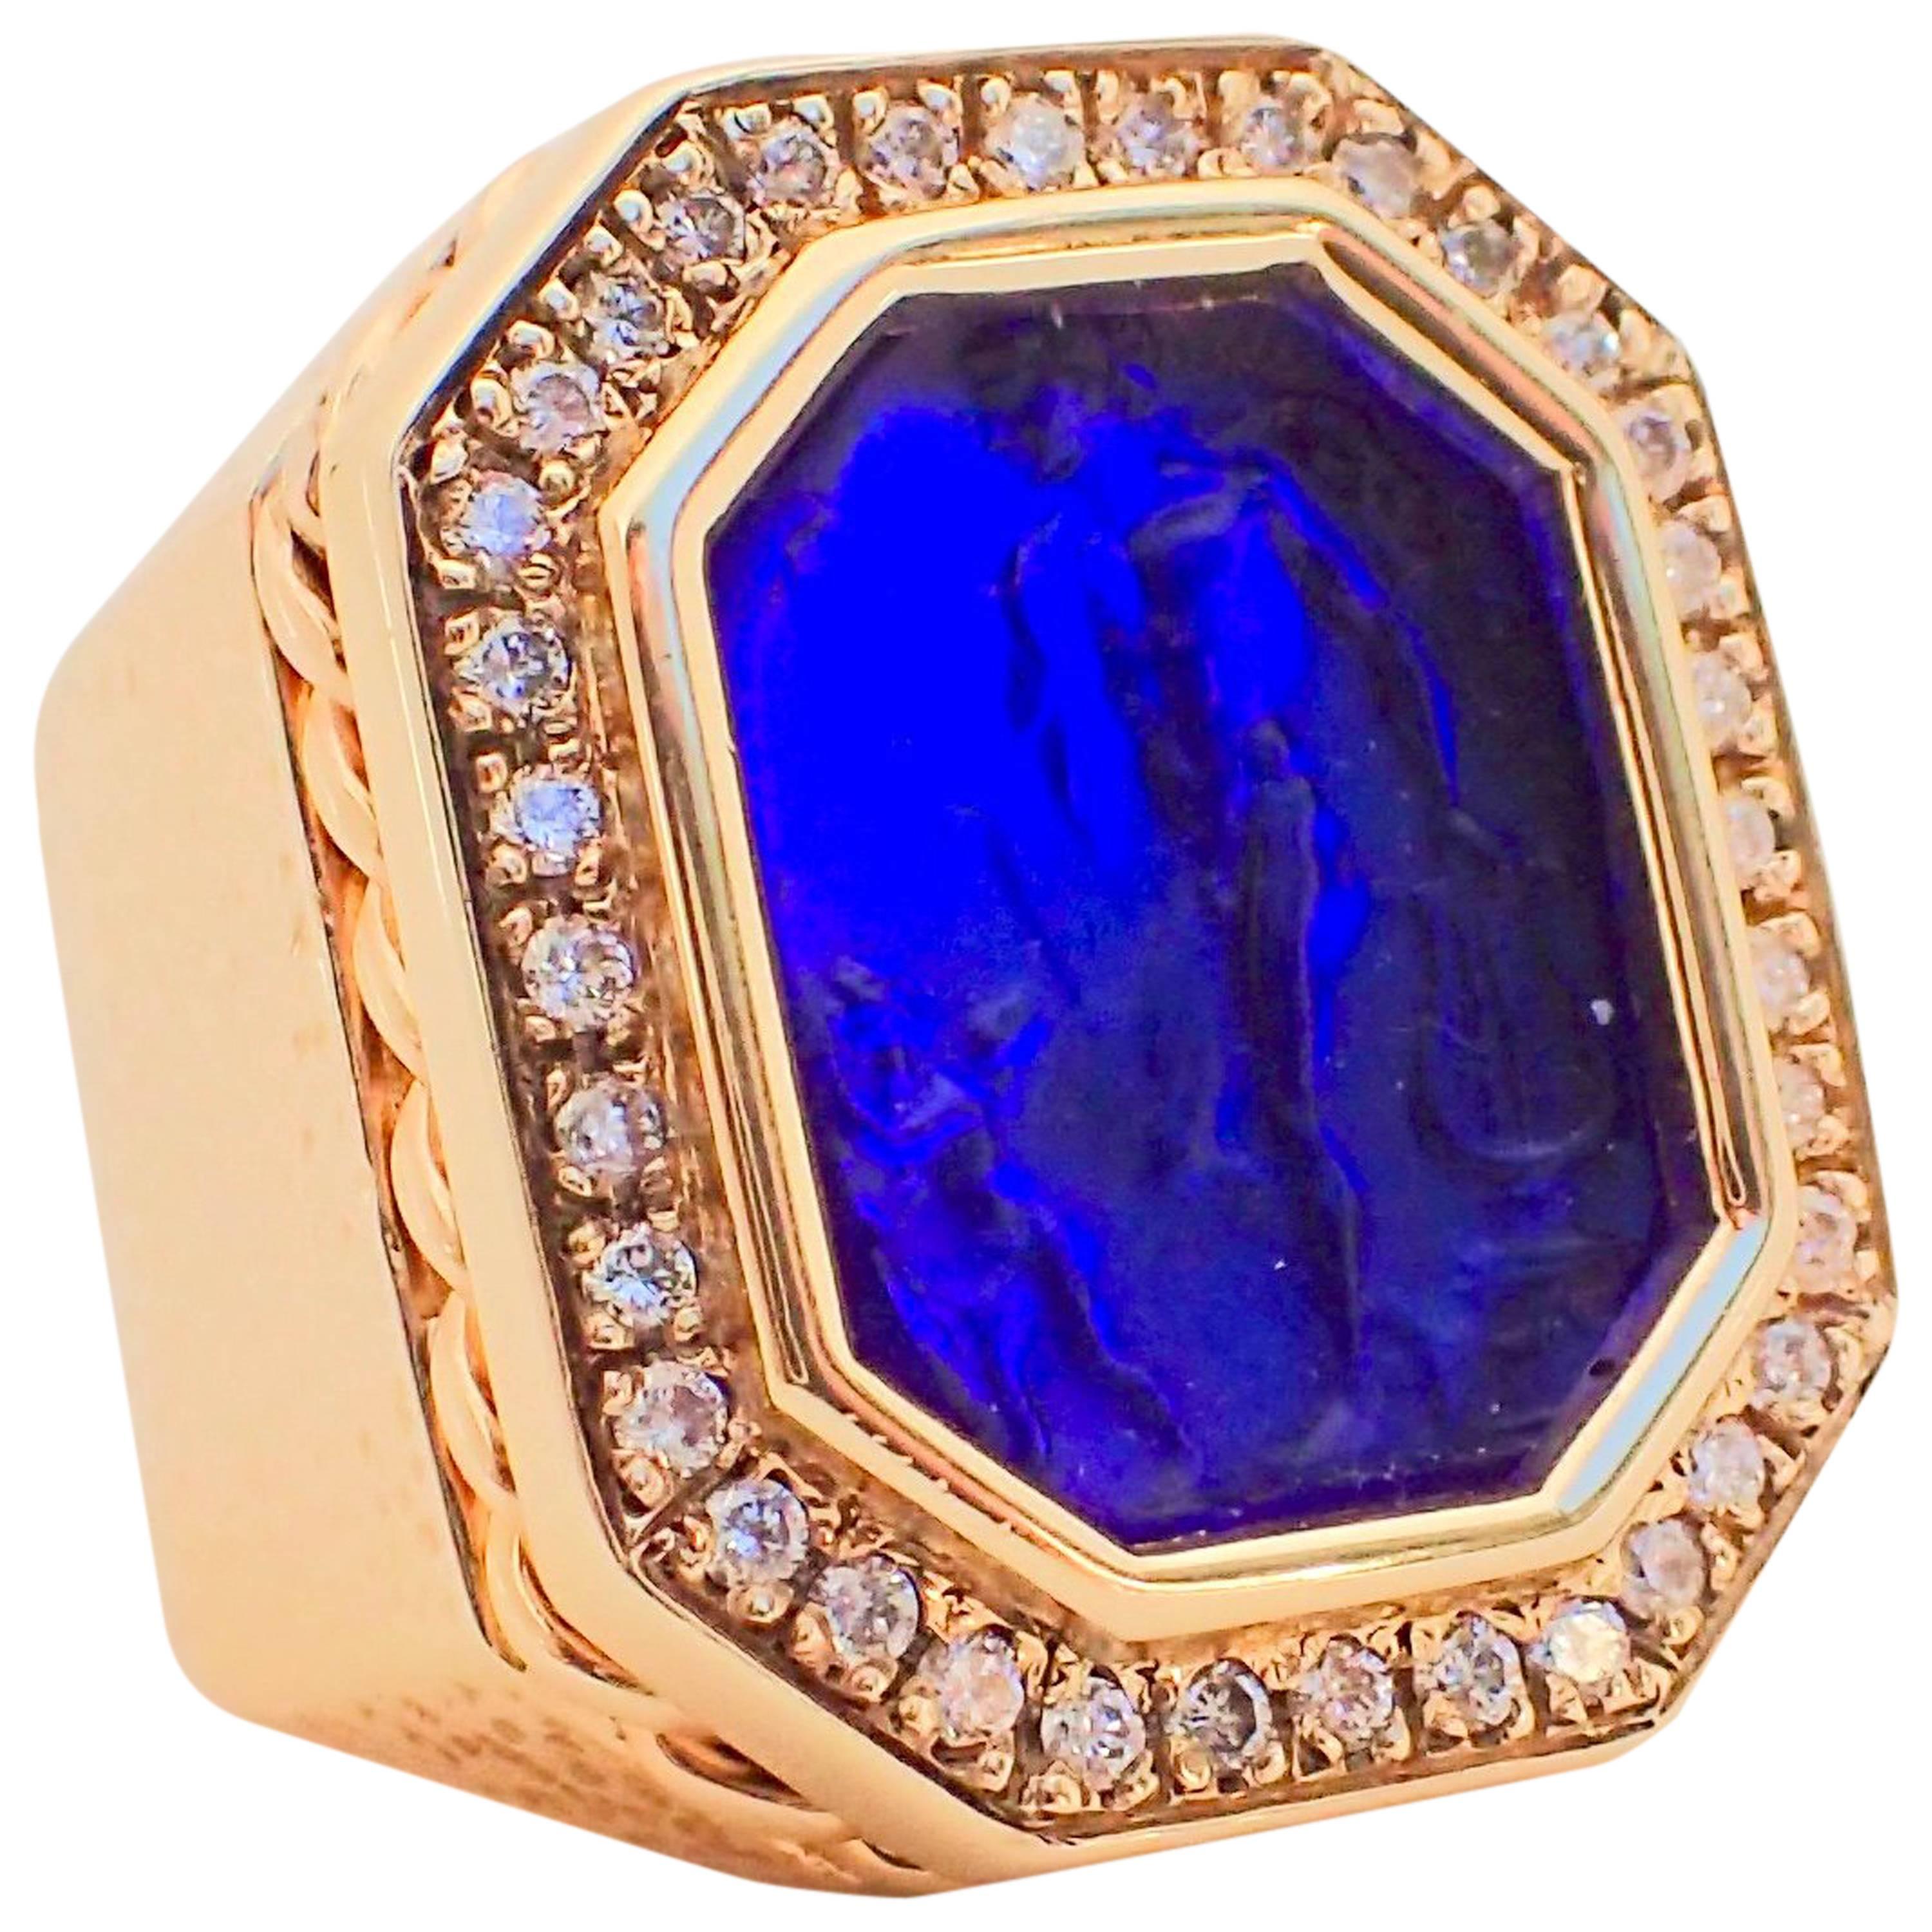 One (1) 14k yellow gold ring has a hammered texture, braided wire crown, one (1) blue intaglio and thirty-six (36) Round Brilliant Cut diamonds surrounding the intaglio, that weigh a total of 0.43 carats, that measure 1.35 x 1.35 mm, with Clarity